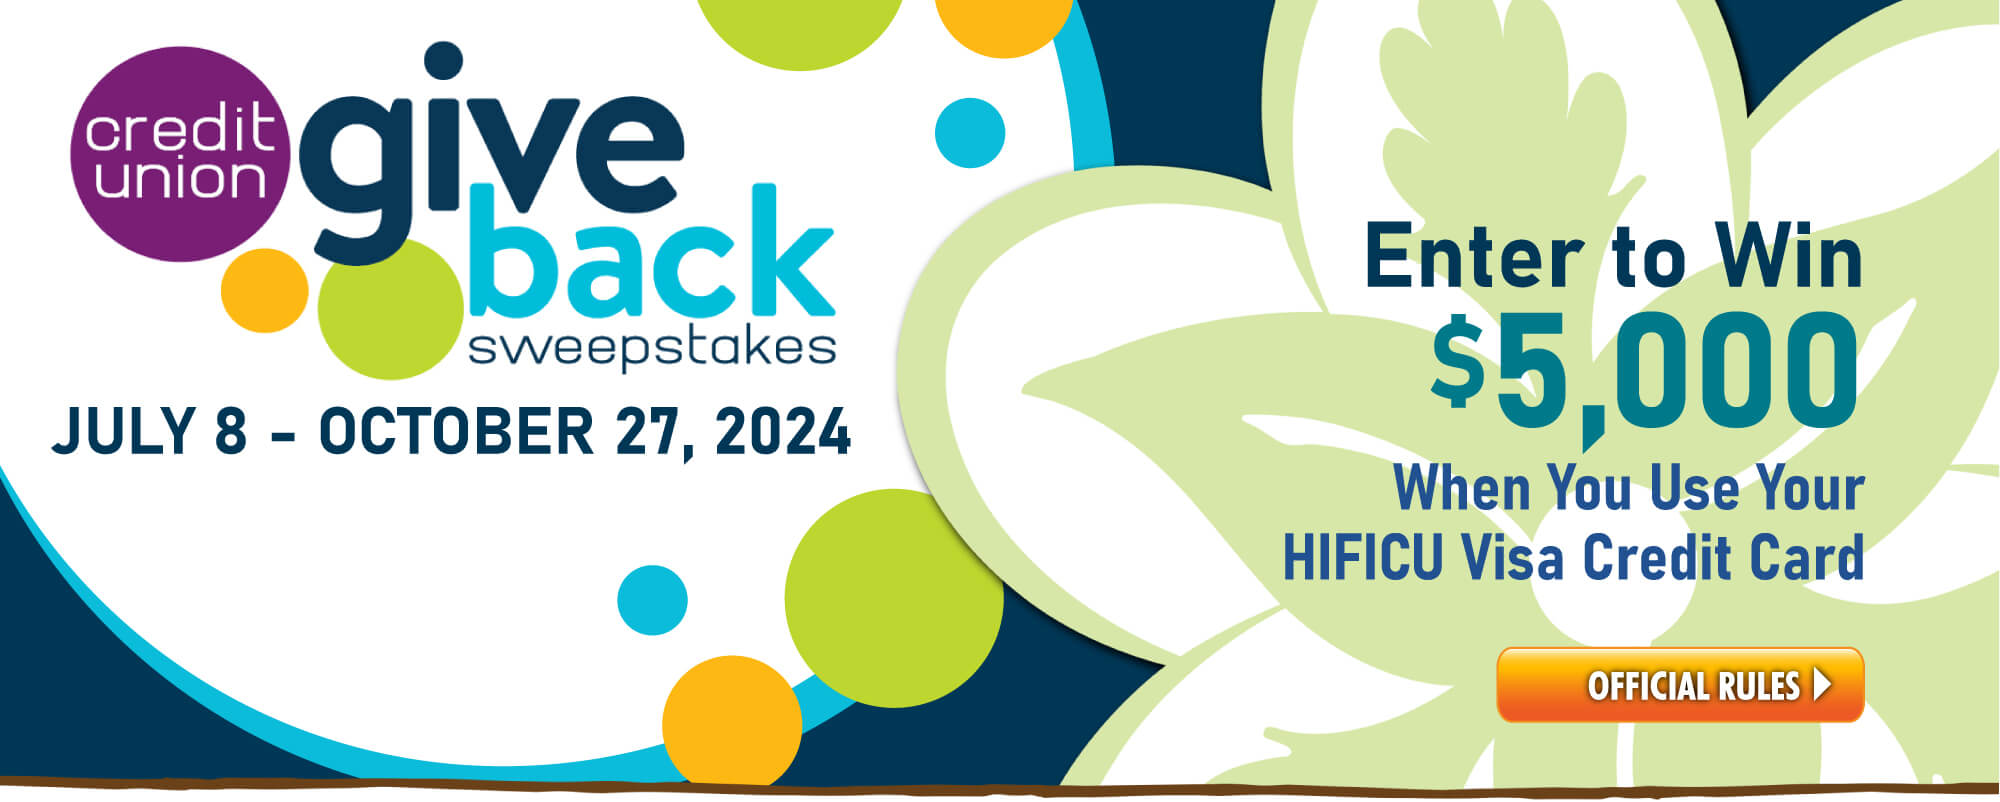 Credit Union give back sweepstakes. July 9 - October 27, 2024. Enter to win $5,000 When you use your HIFICU Visa Credit Card. Official Rules